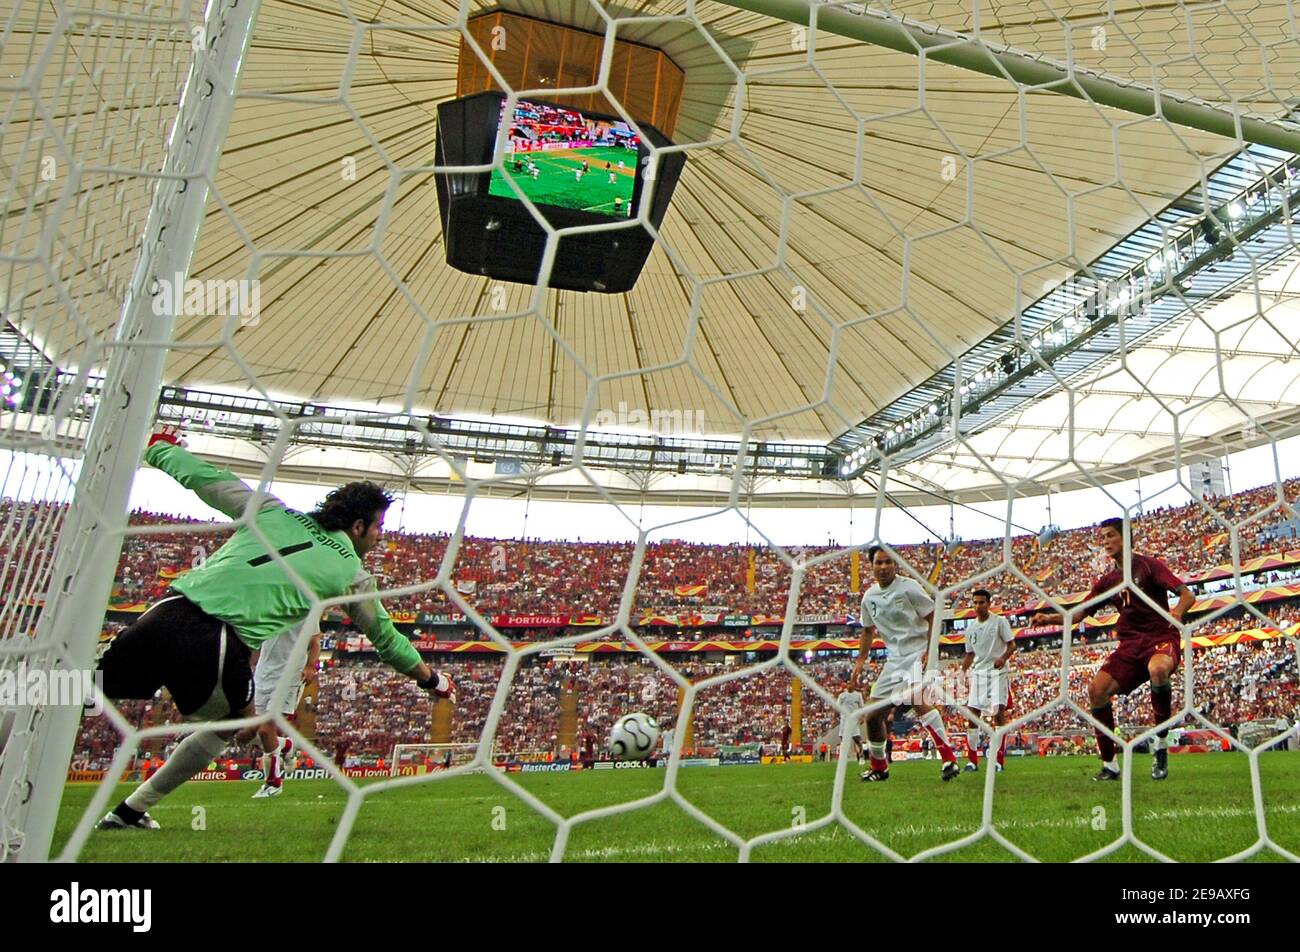 Portugal's Cristiano Ronaldo scoring during the World Cup 2006, Portugal vs Iran at the Fifa World Cup Stadium in Frankfurt, Germany on June 17, 2006. Portugal won 2-0. Photo by Gouhier-Hahn-Orban/Cameleon/ABACAPRESS.COM Stock Photo